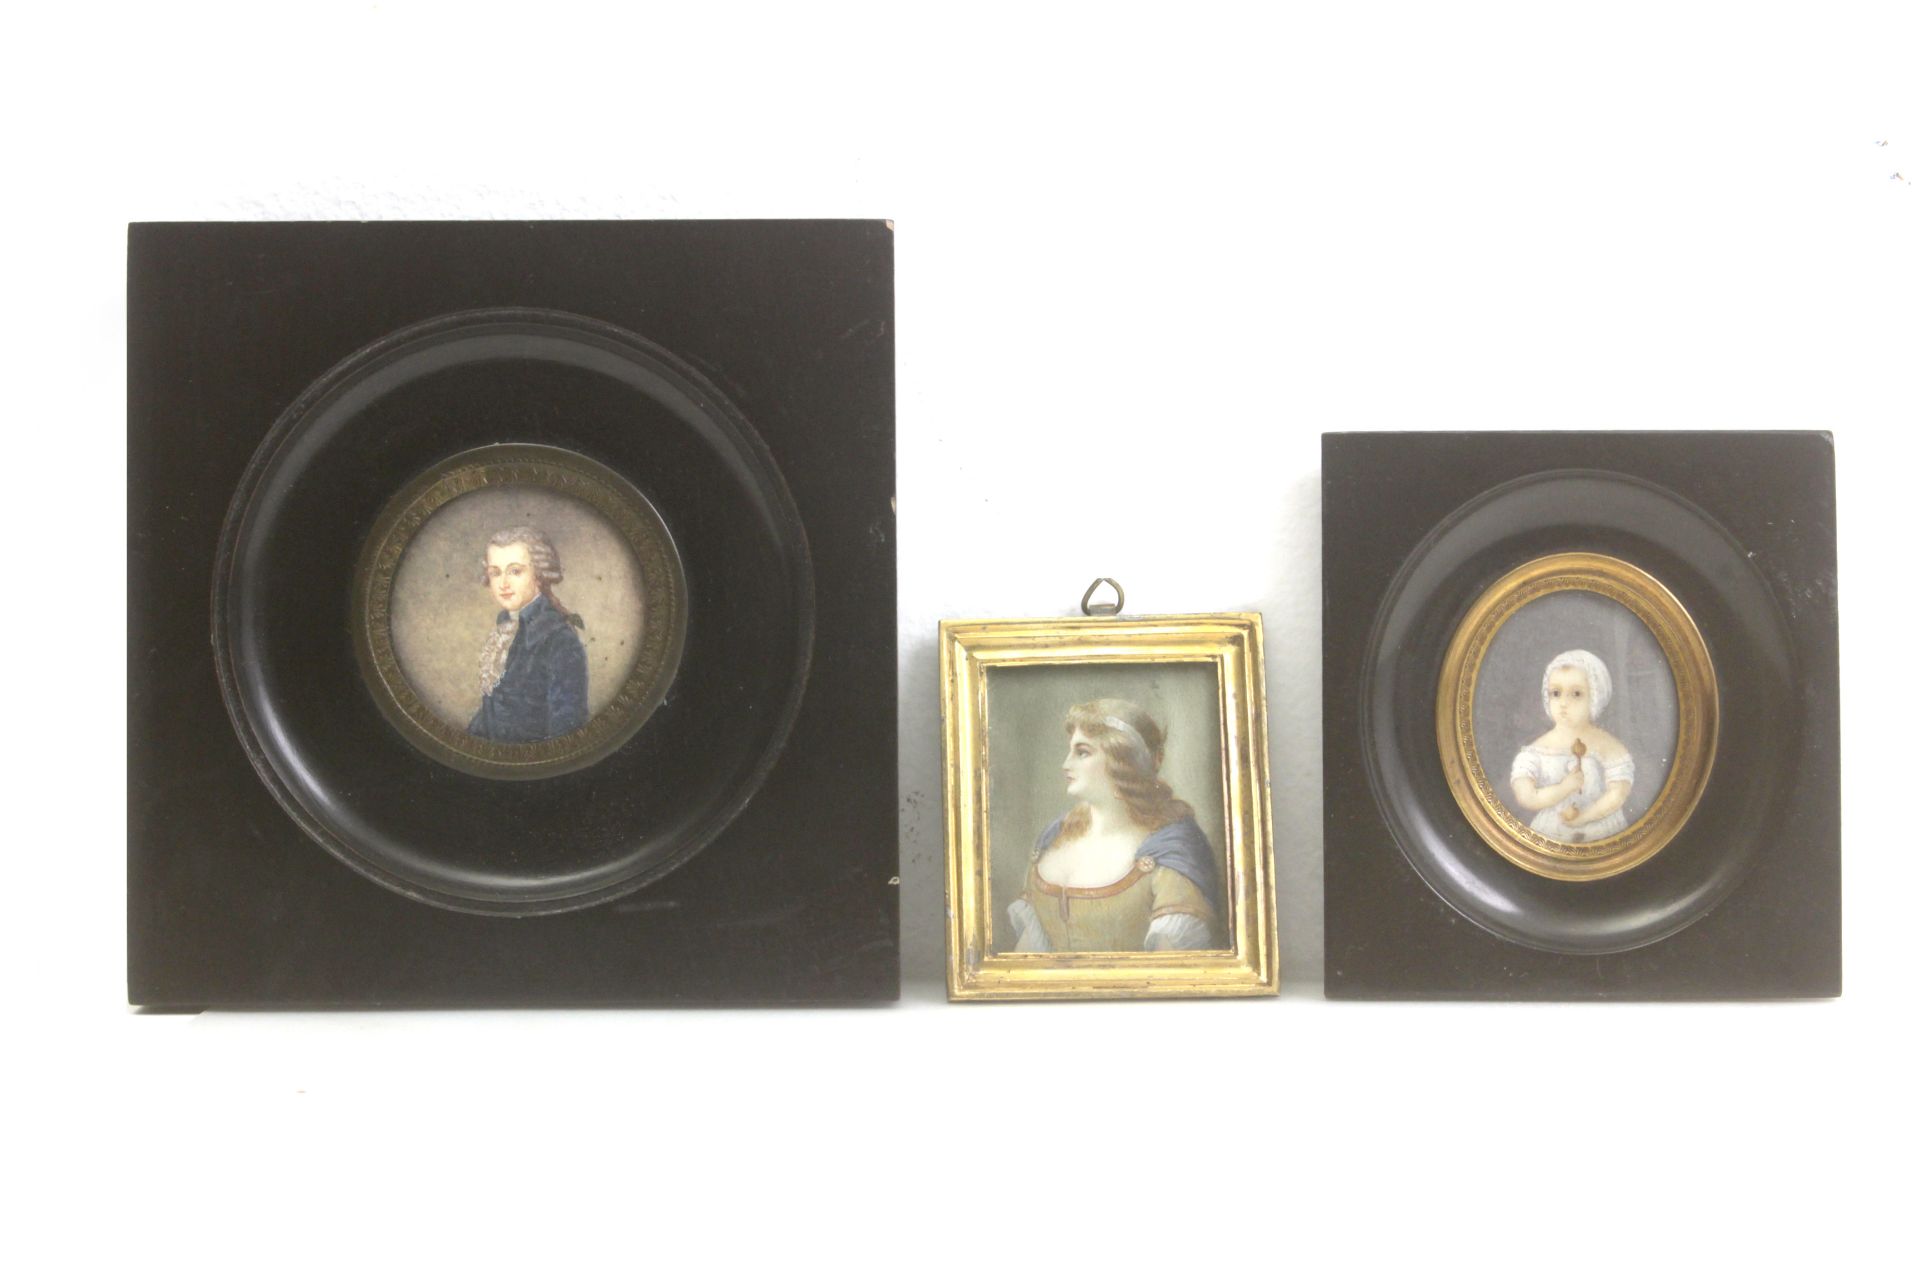 A collection of three portrait miniatures